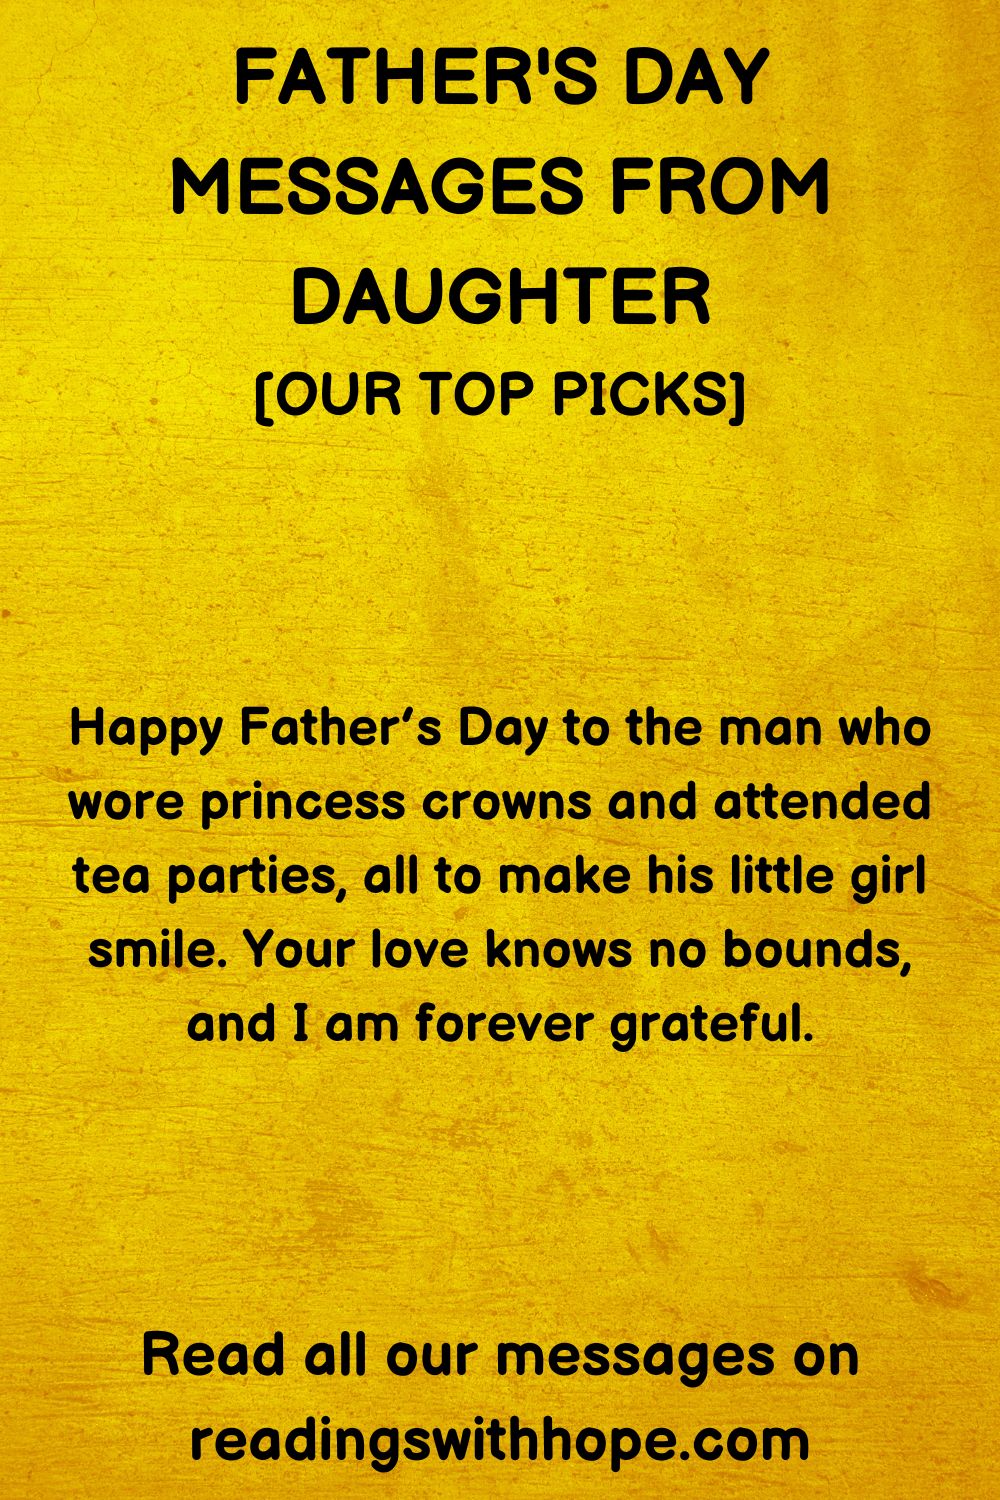 49 Father's Day Messages From Daughter